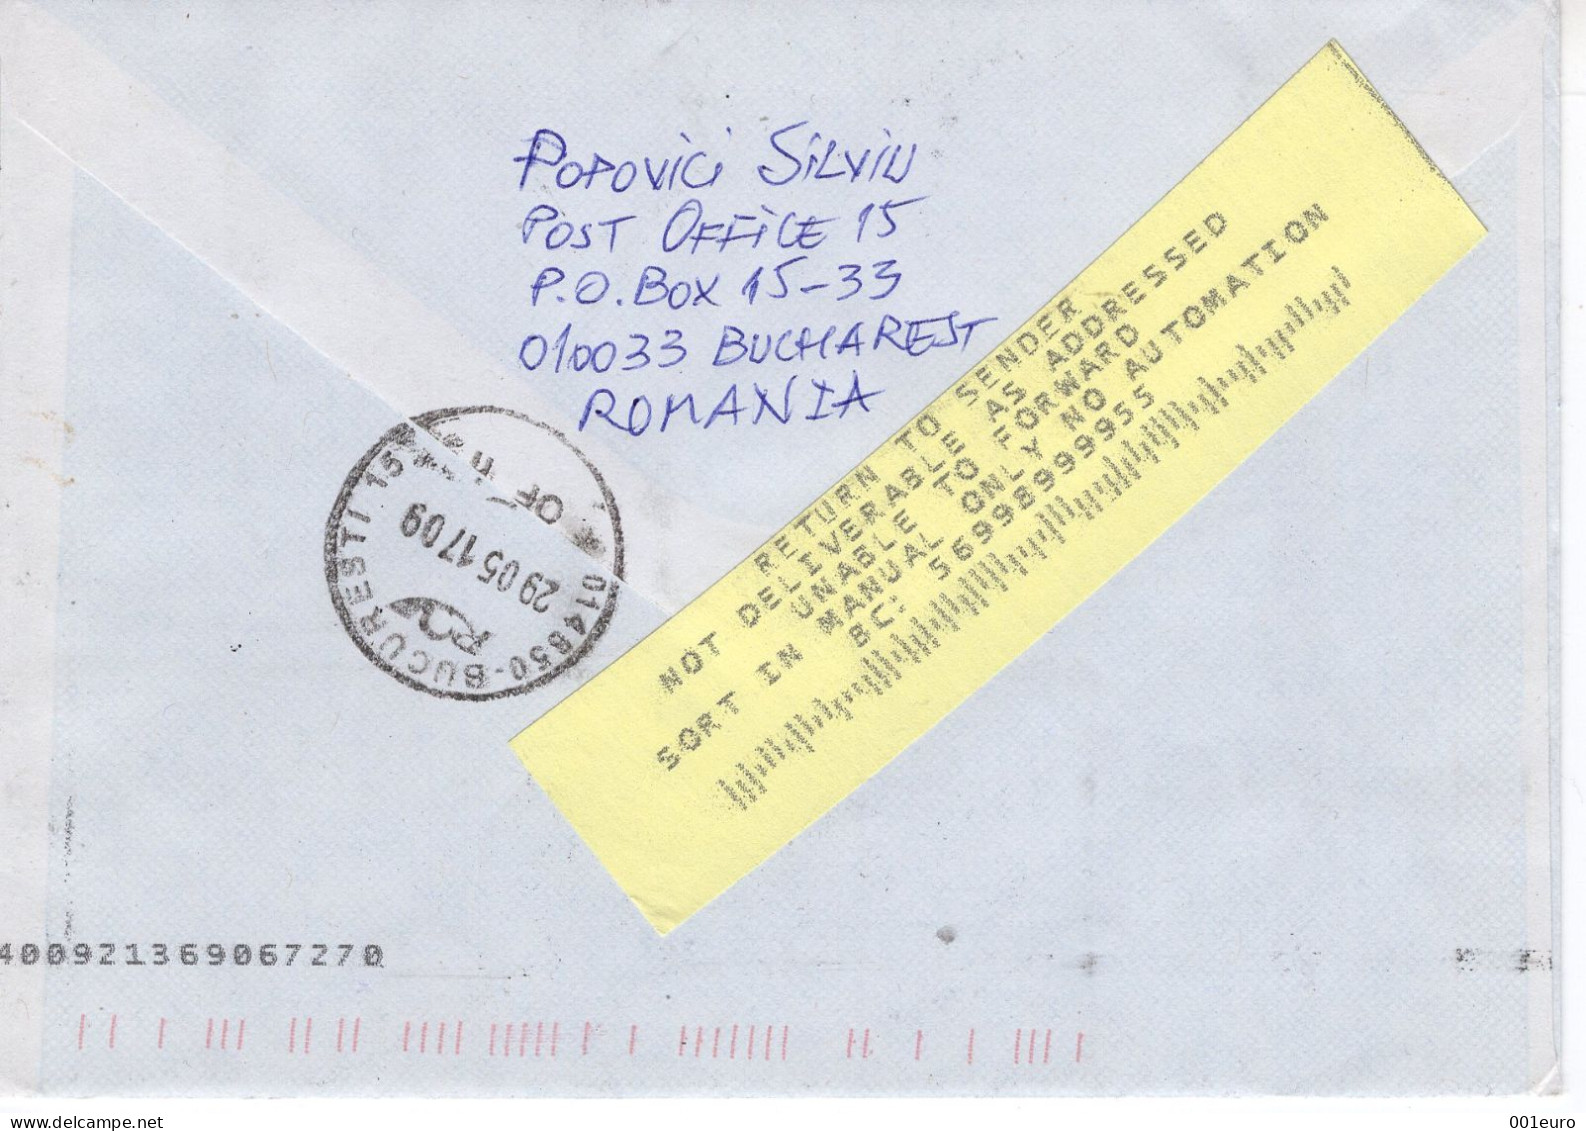 ROMANIA: TRAIN ORIENT EXPRESS, Circulated Cover - Registered Shipping! - Oblitérés